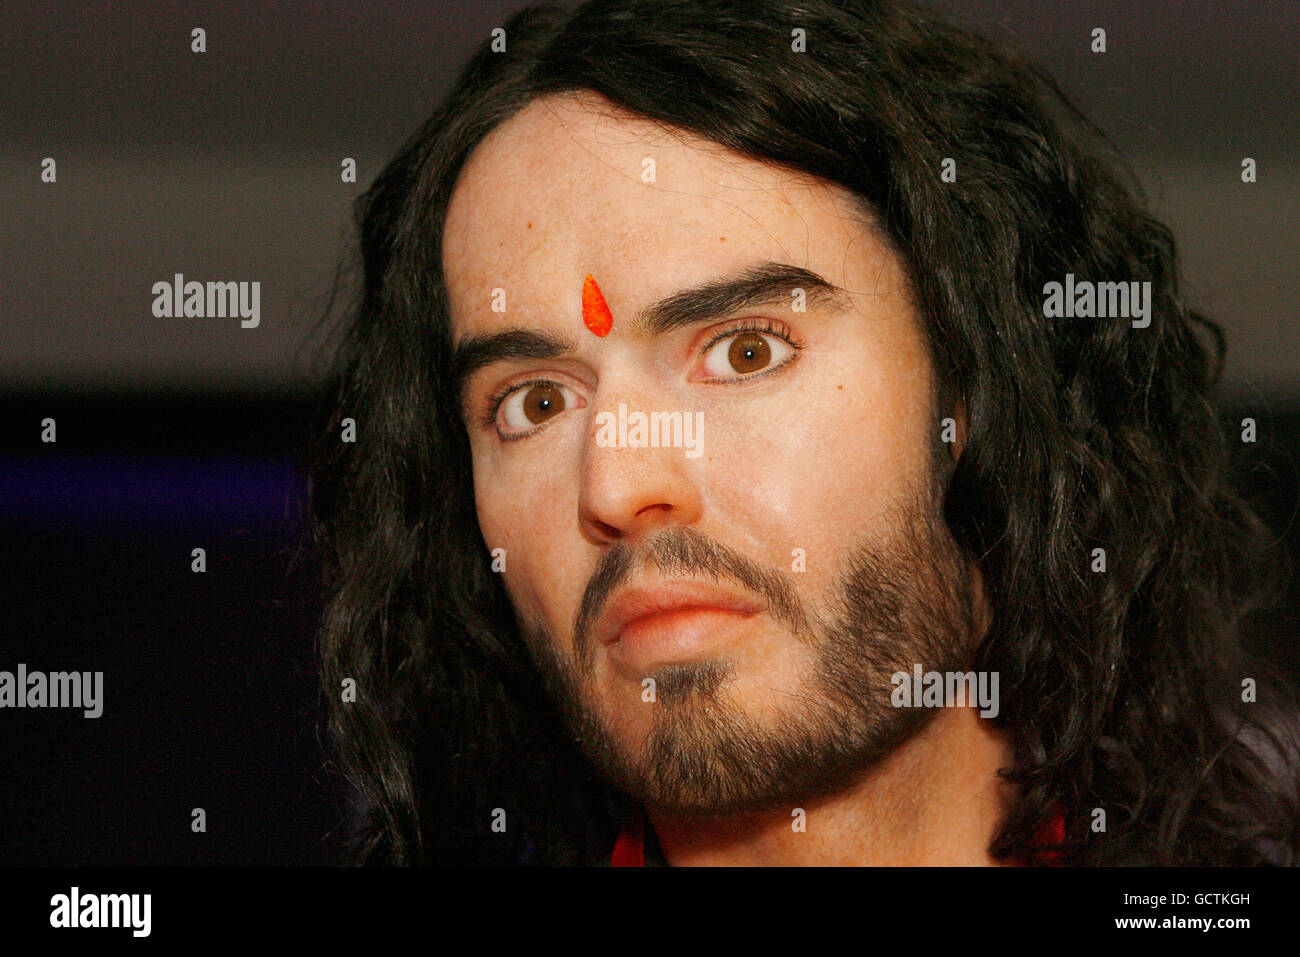 Russell Brand's wax figure at Madame Tussauds, London, which has been painted with a tilak ahead of his wedding in India to pop star Katy Perry. Stock Photo